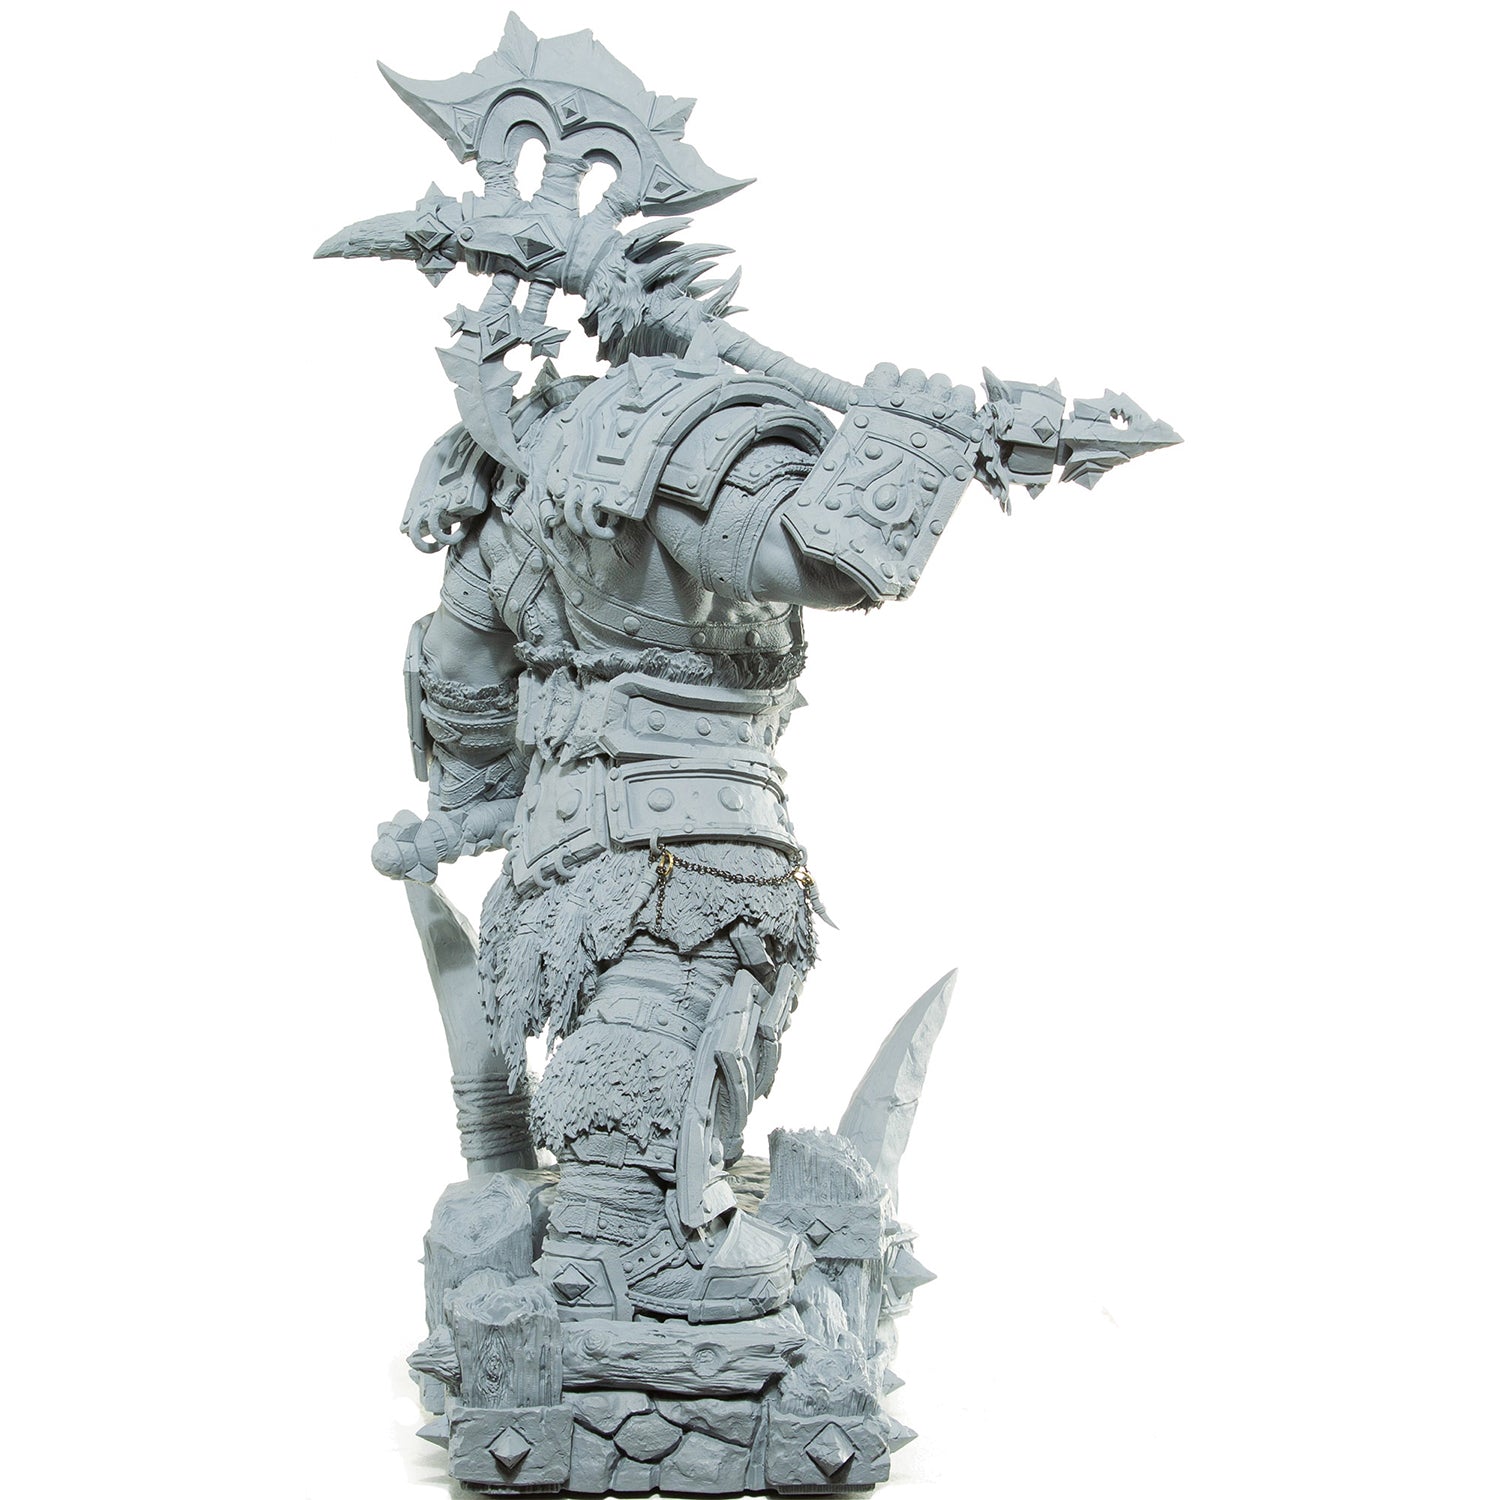 World of Warcraft Warchief Thrall 24" Limited Edition Statue in Grey - Back Right View